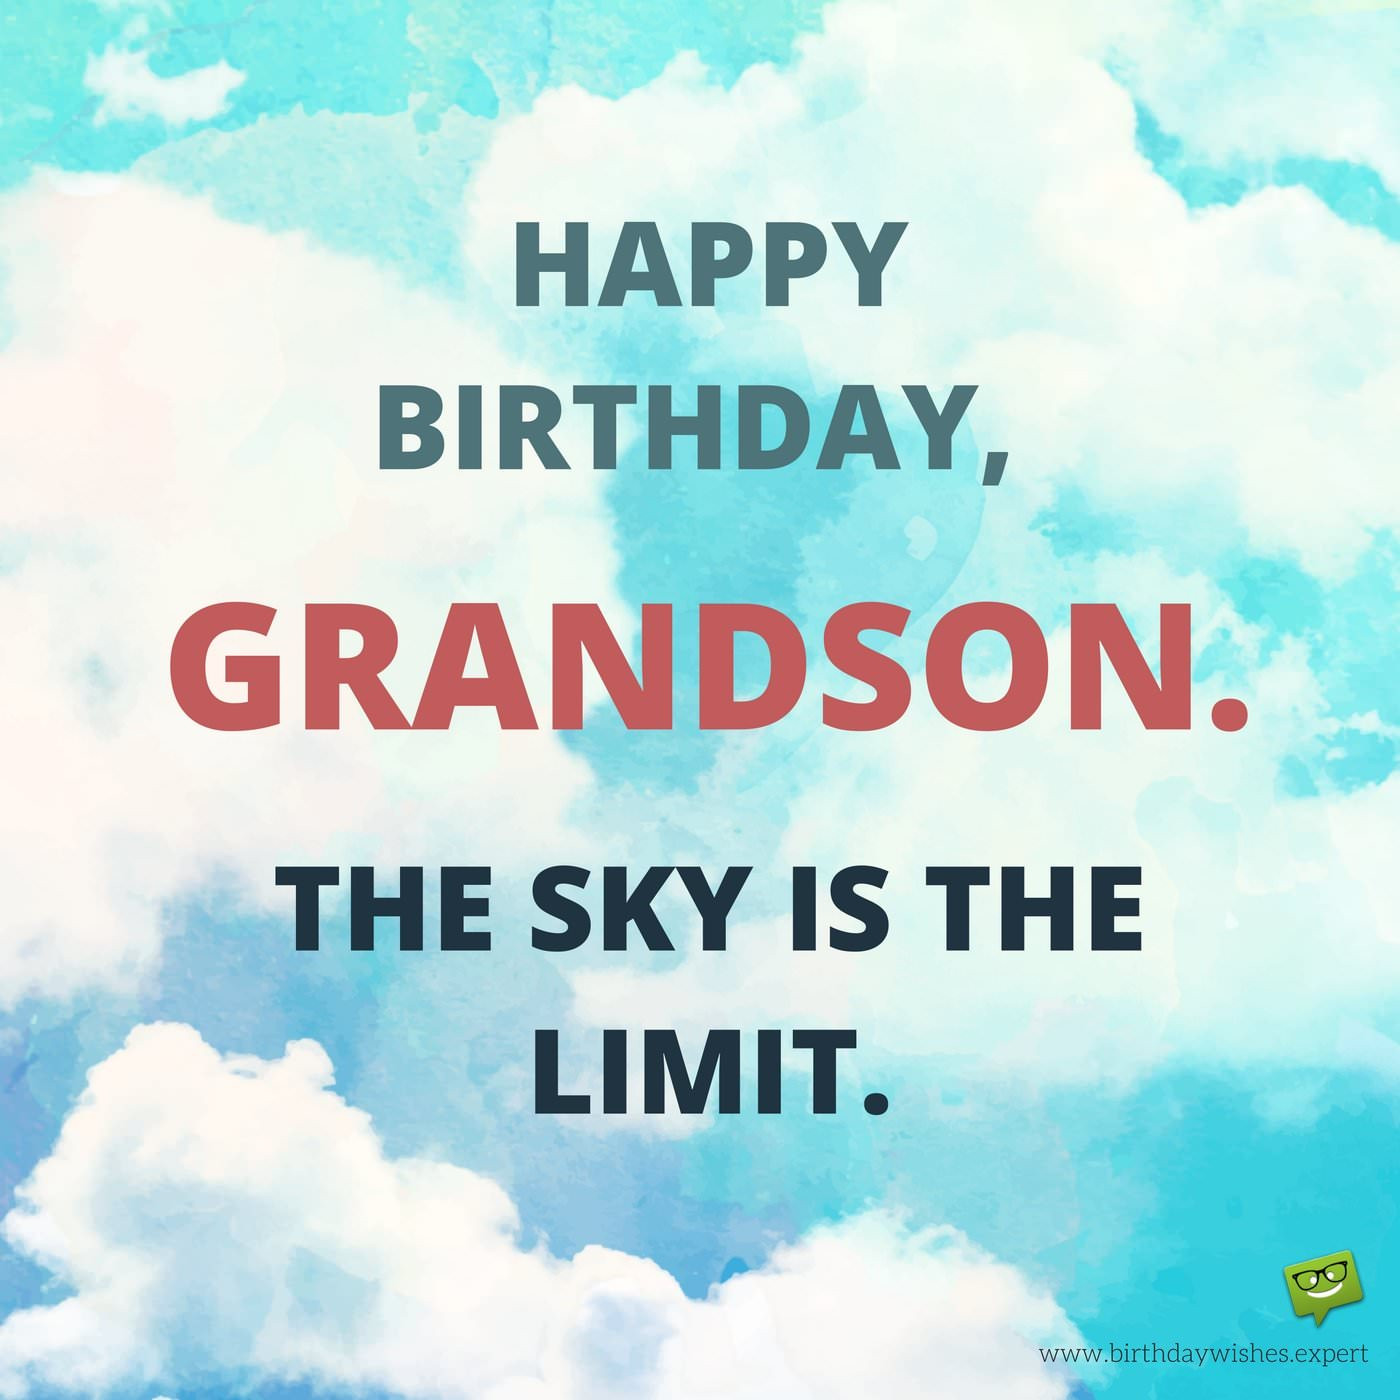 Birthday Wishes For A Grandson
 From your Grandma & Grandpa Birthday Wishes for my Grandson